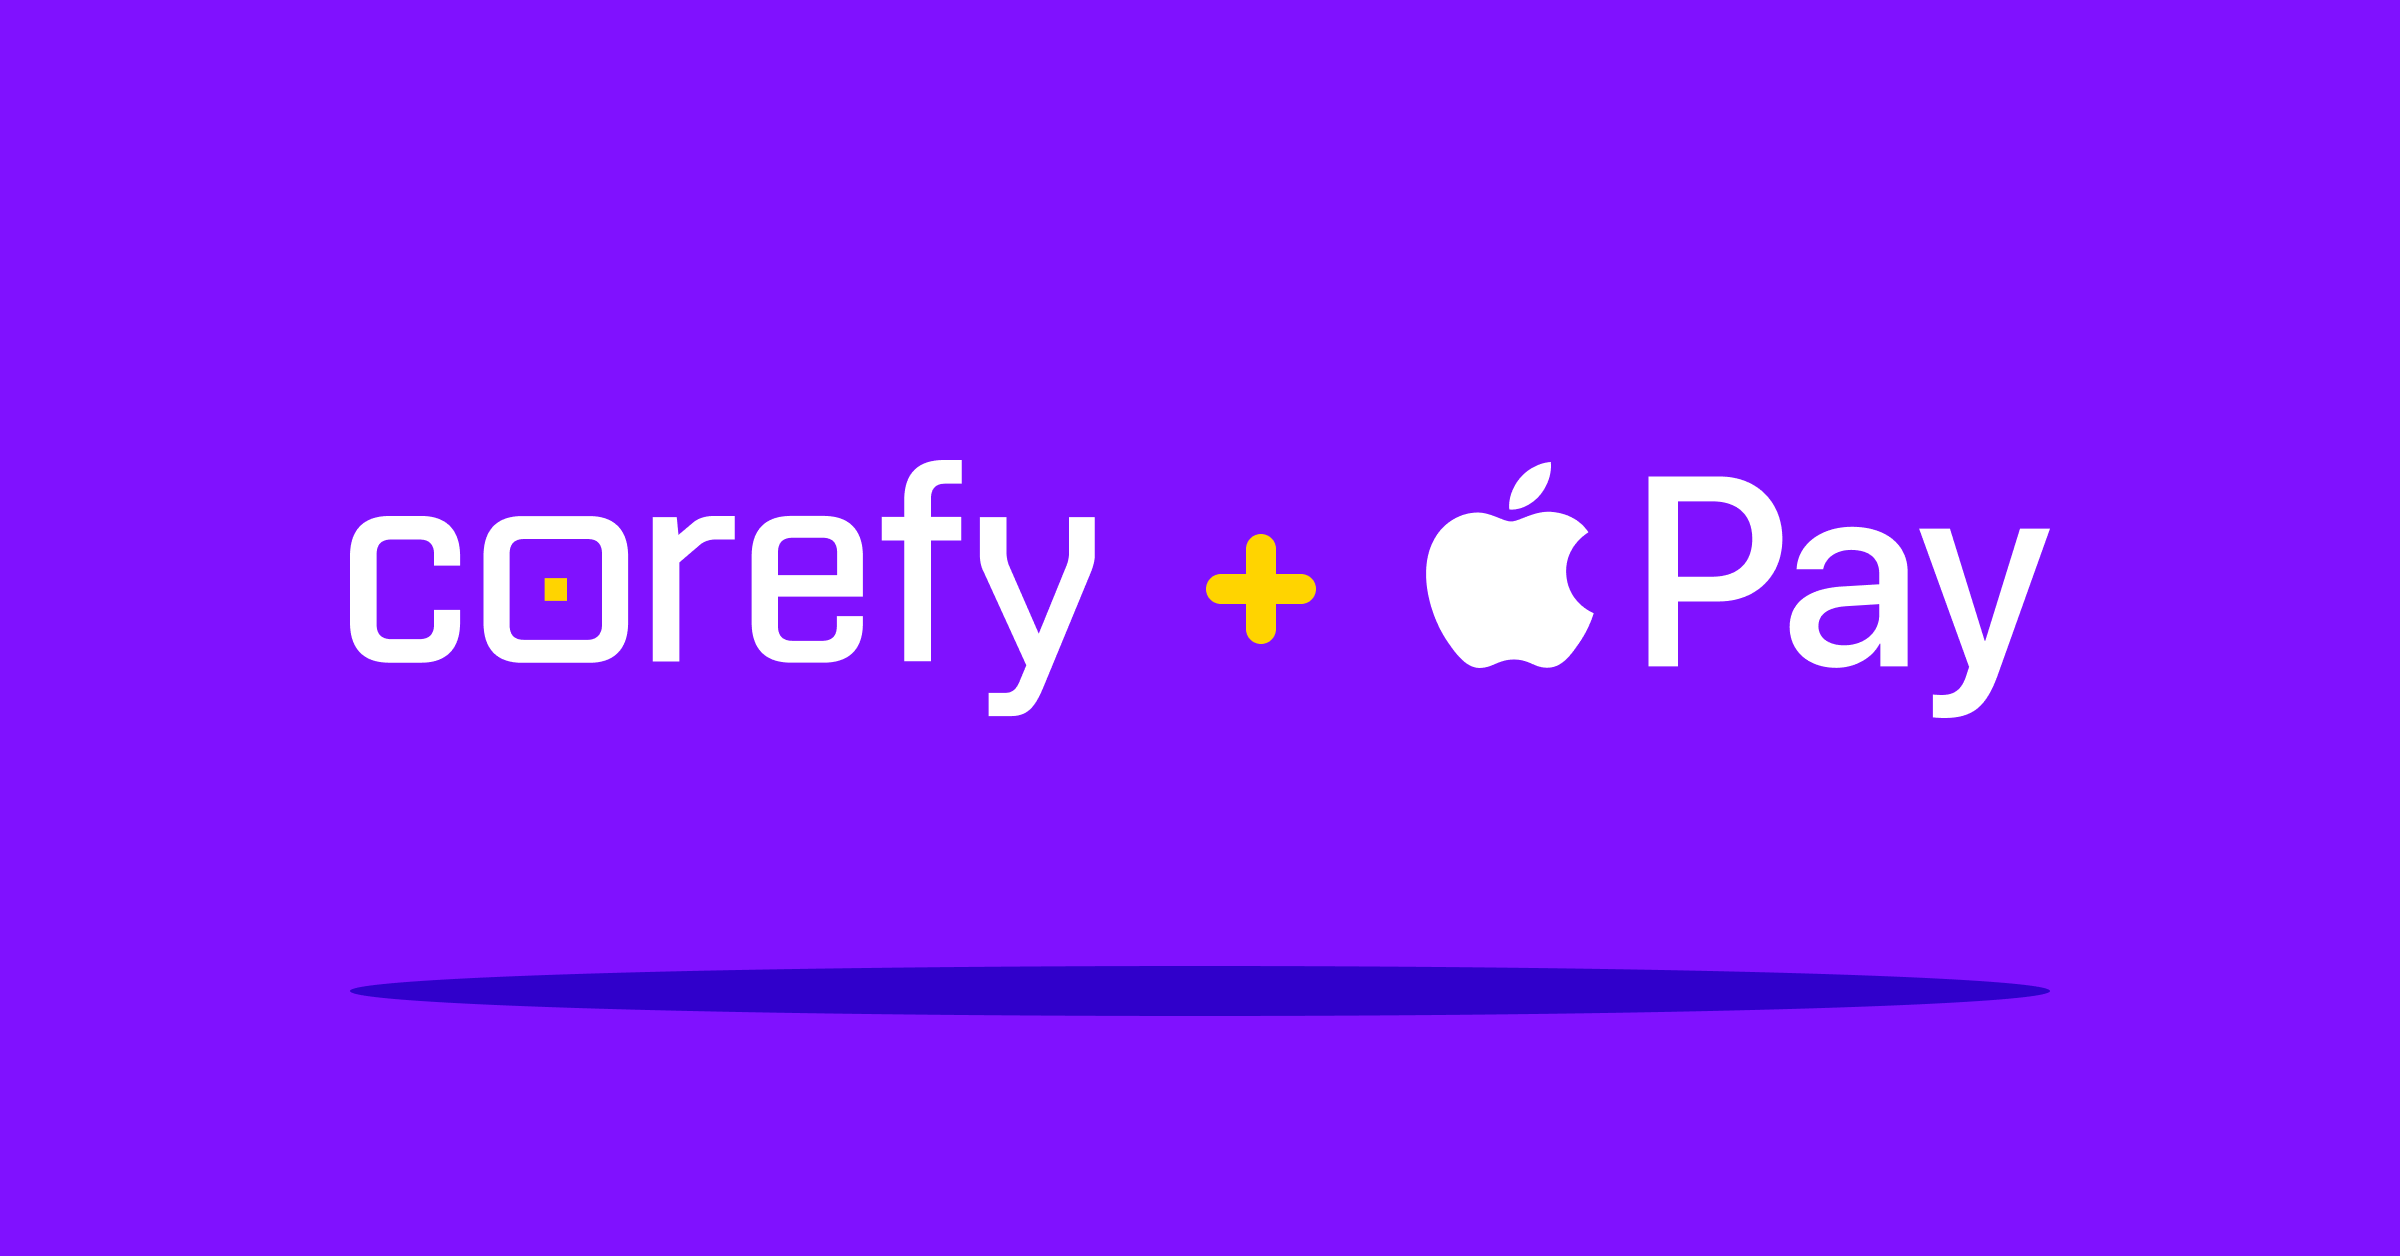 Corefy established direct integration with Apple Pay